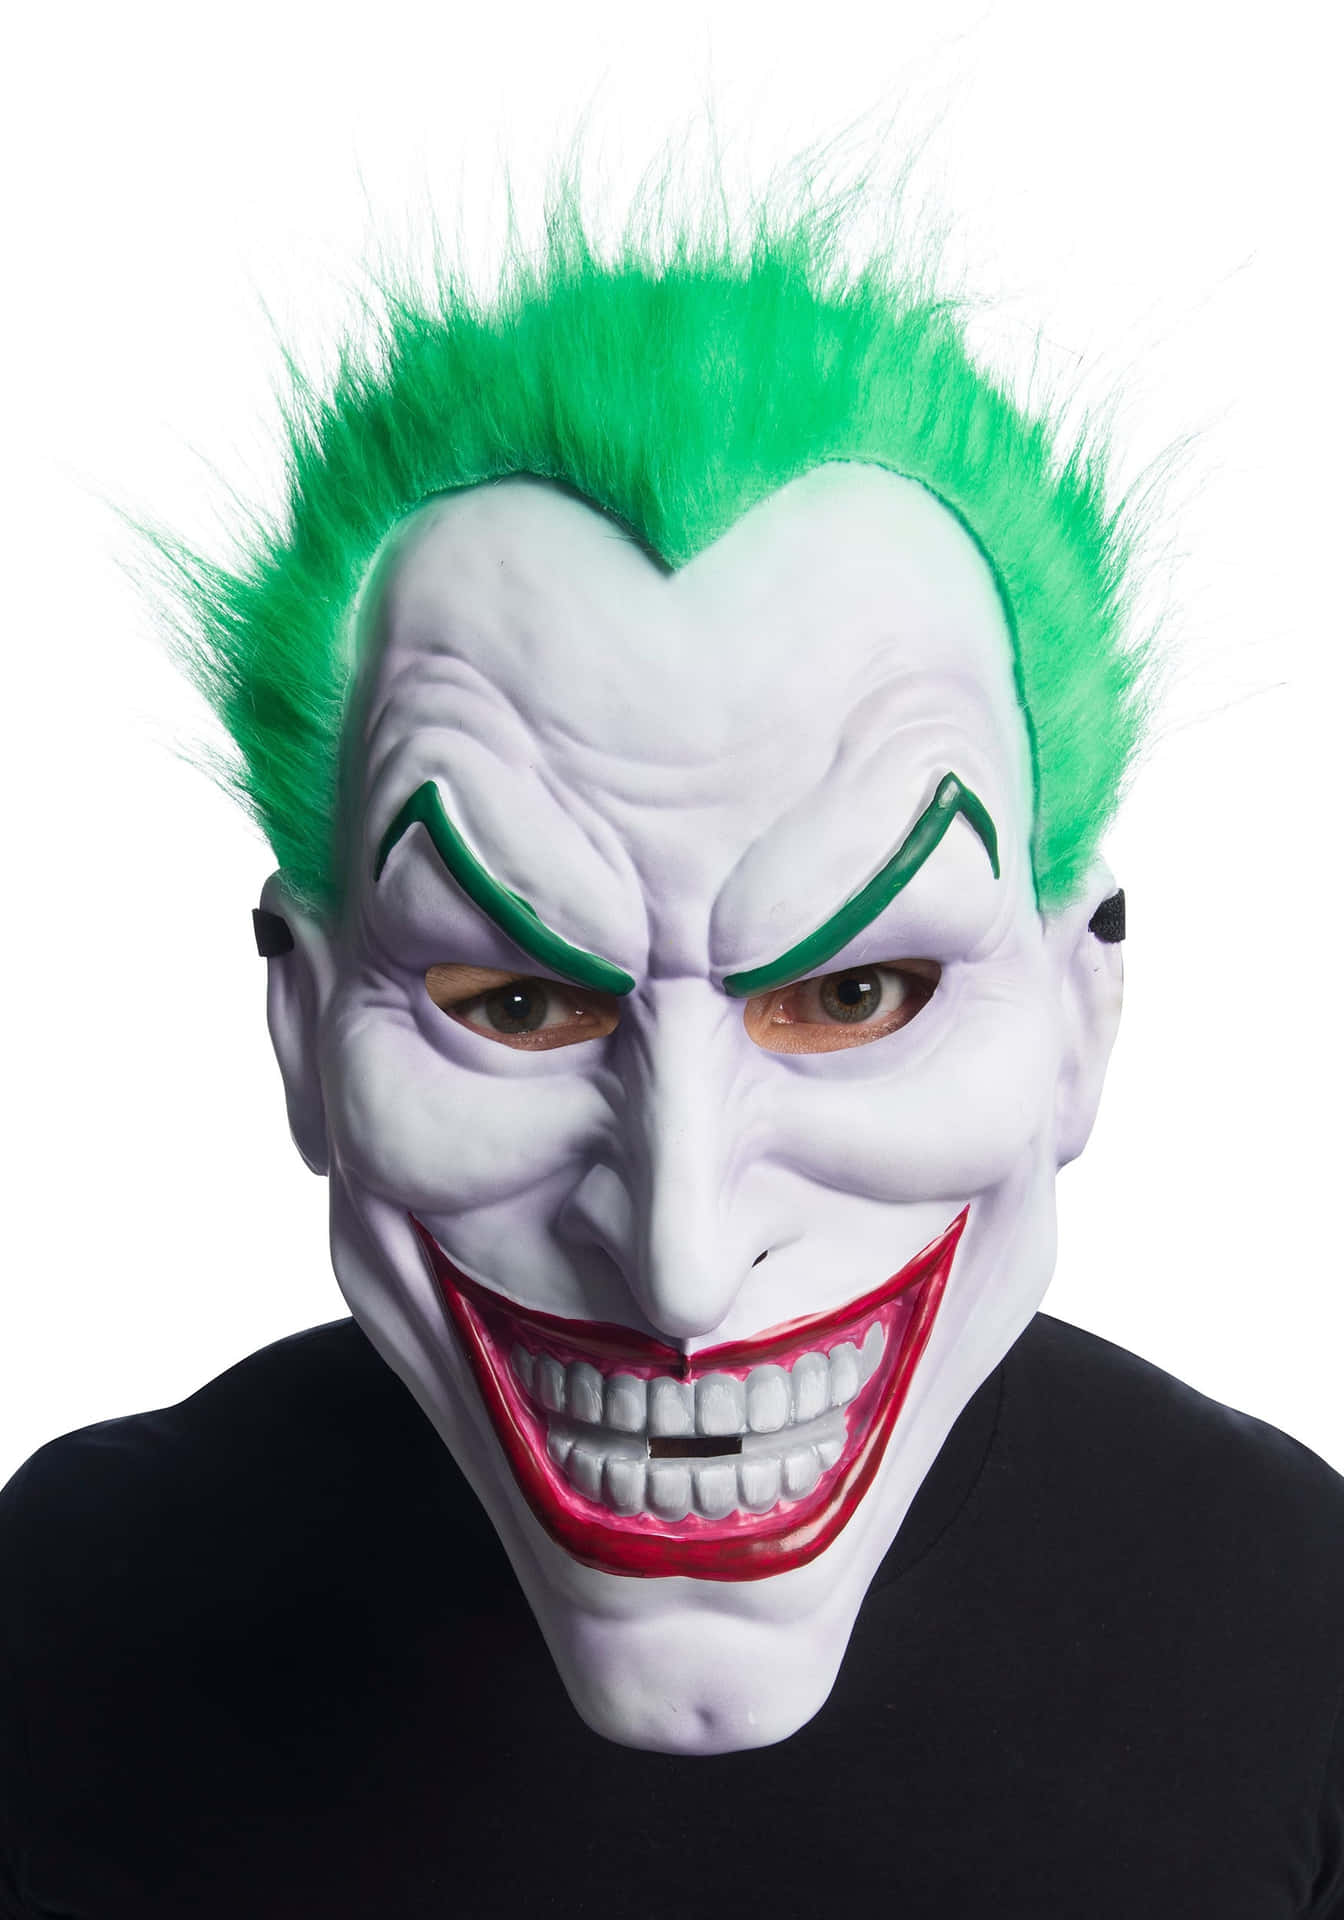 Add a spark to your Halloween with the iconic Joker Mask